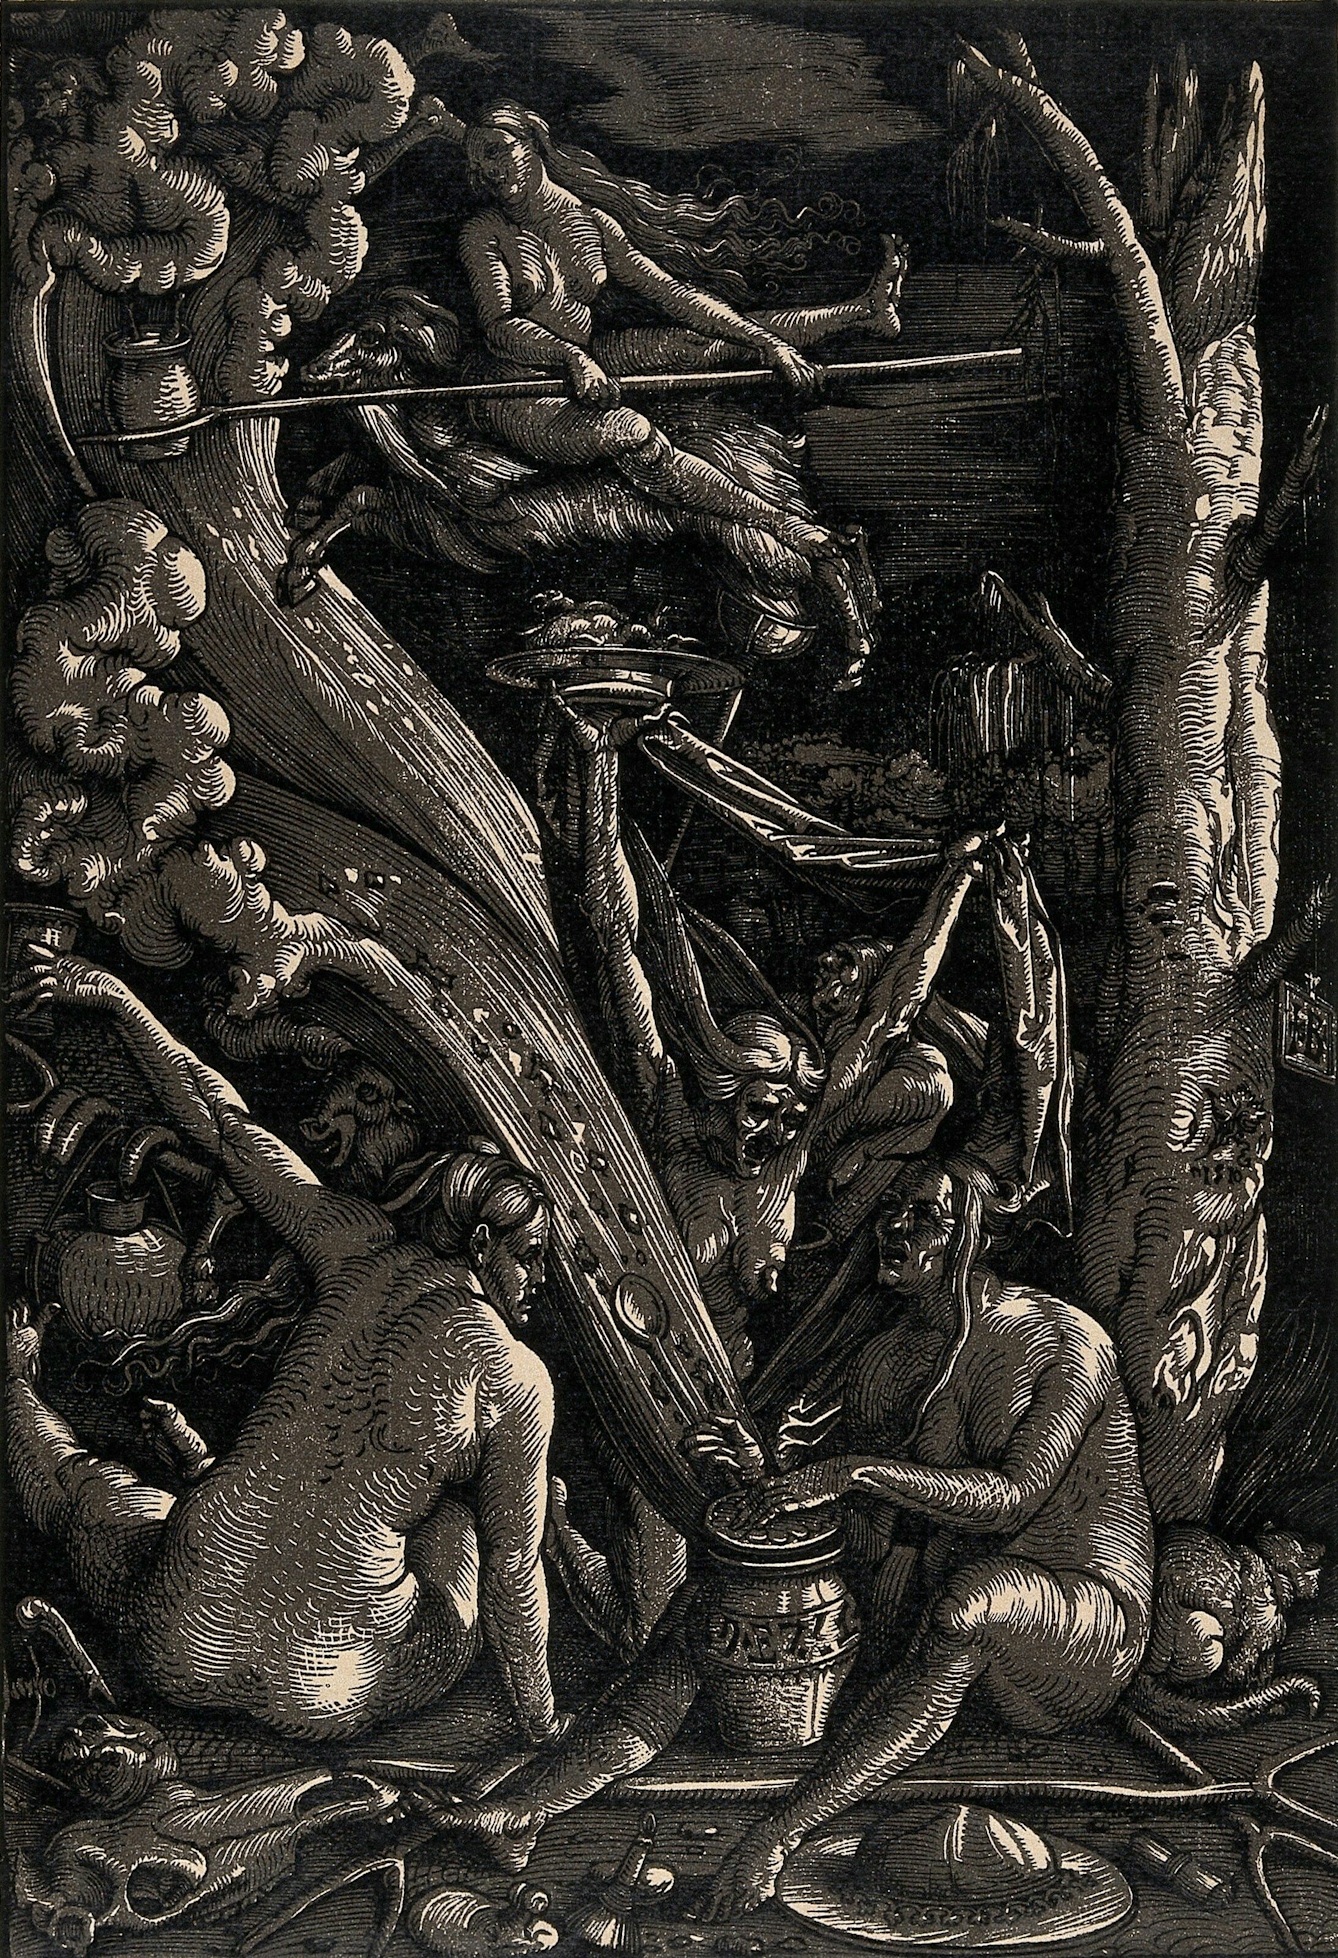 Monochrome illustration, very dark in tone, with one naked woman riding a flying goat and three or four others seated below at the base of a tree preparing drugs in a pot.